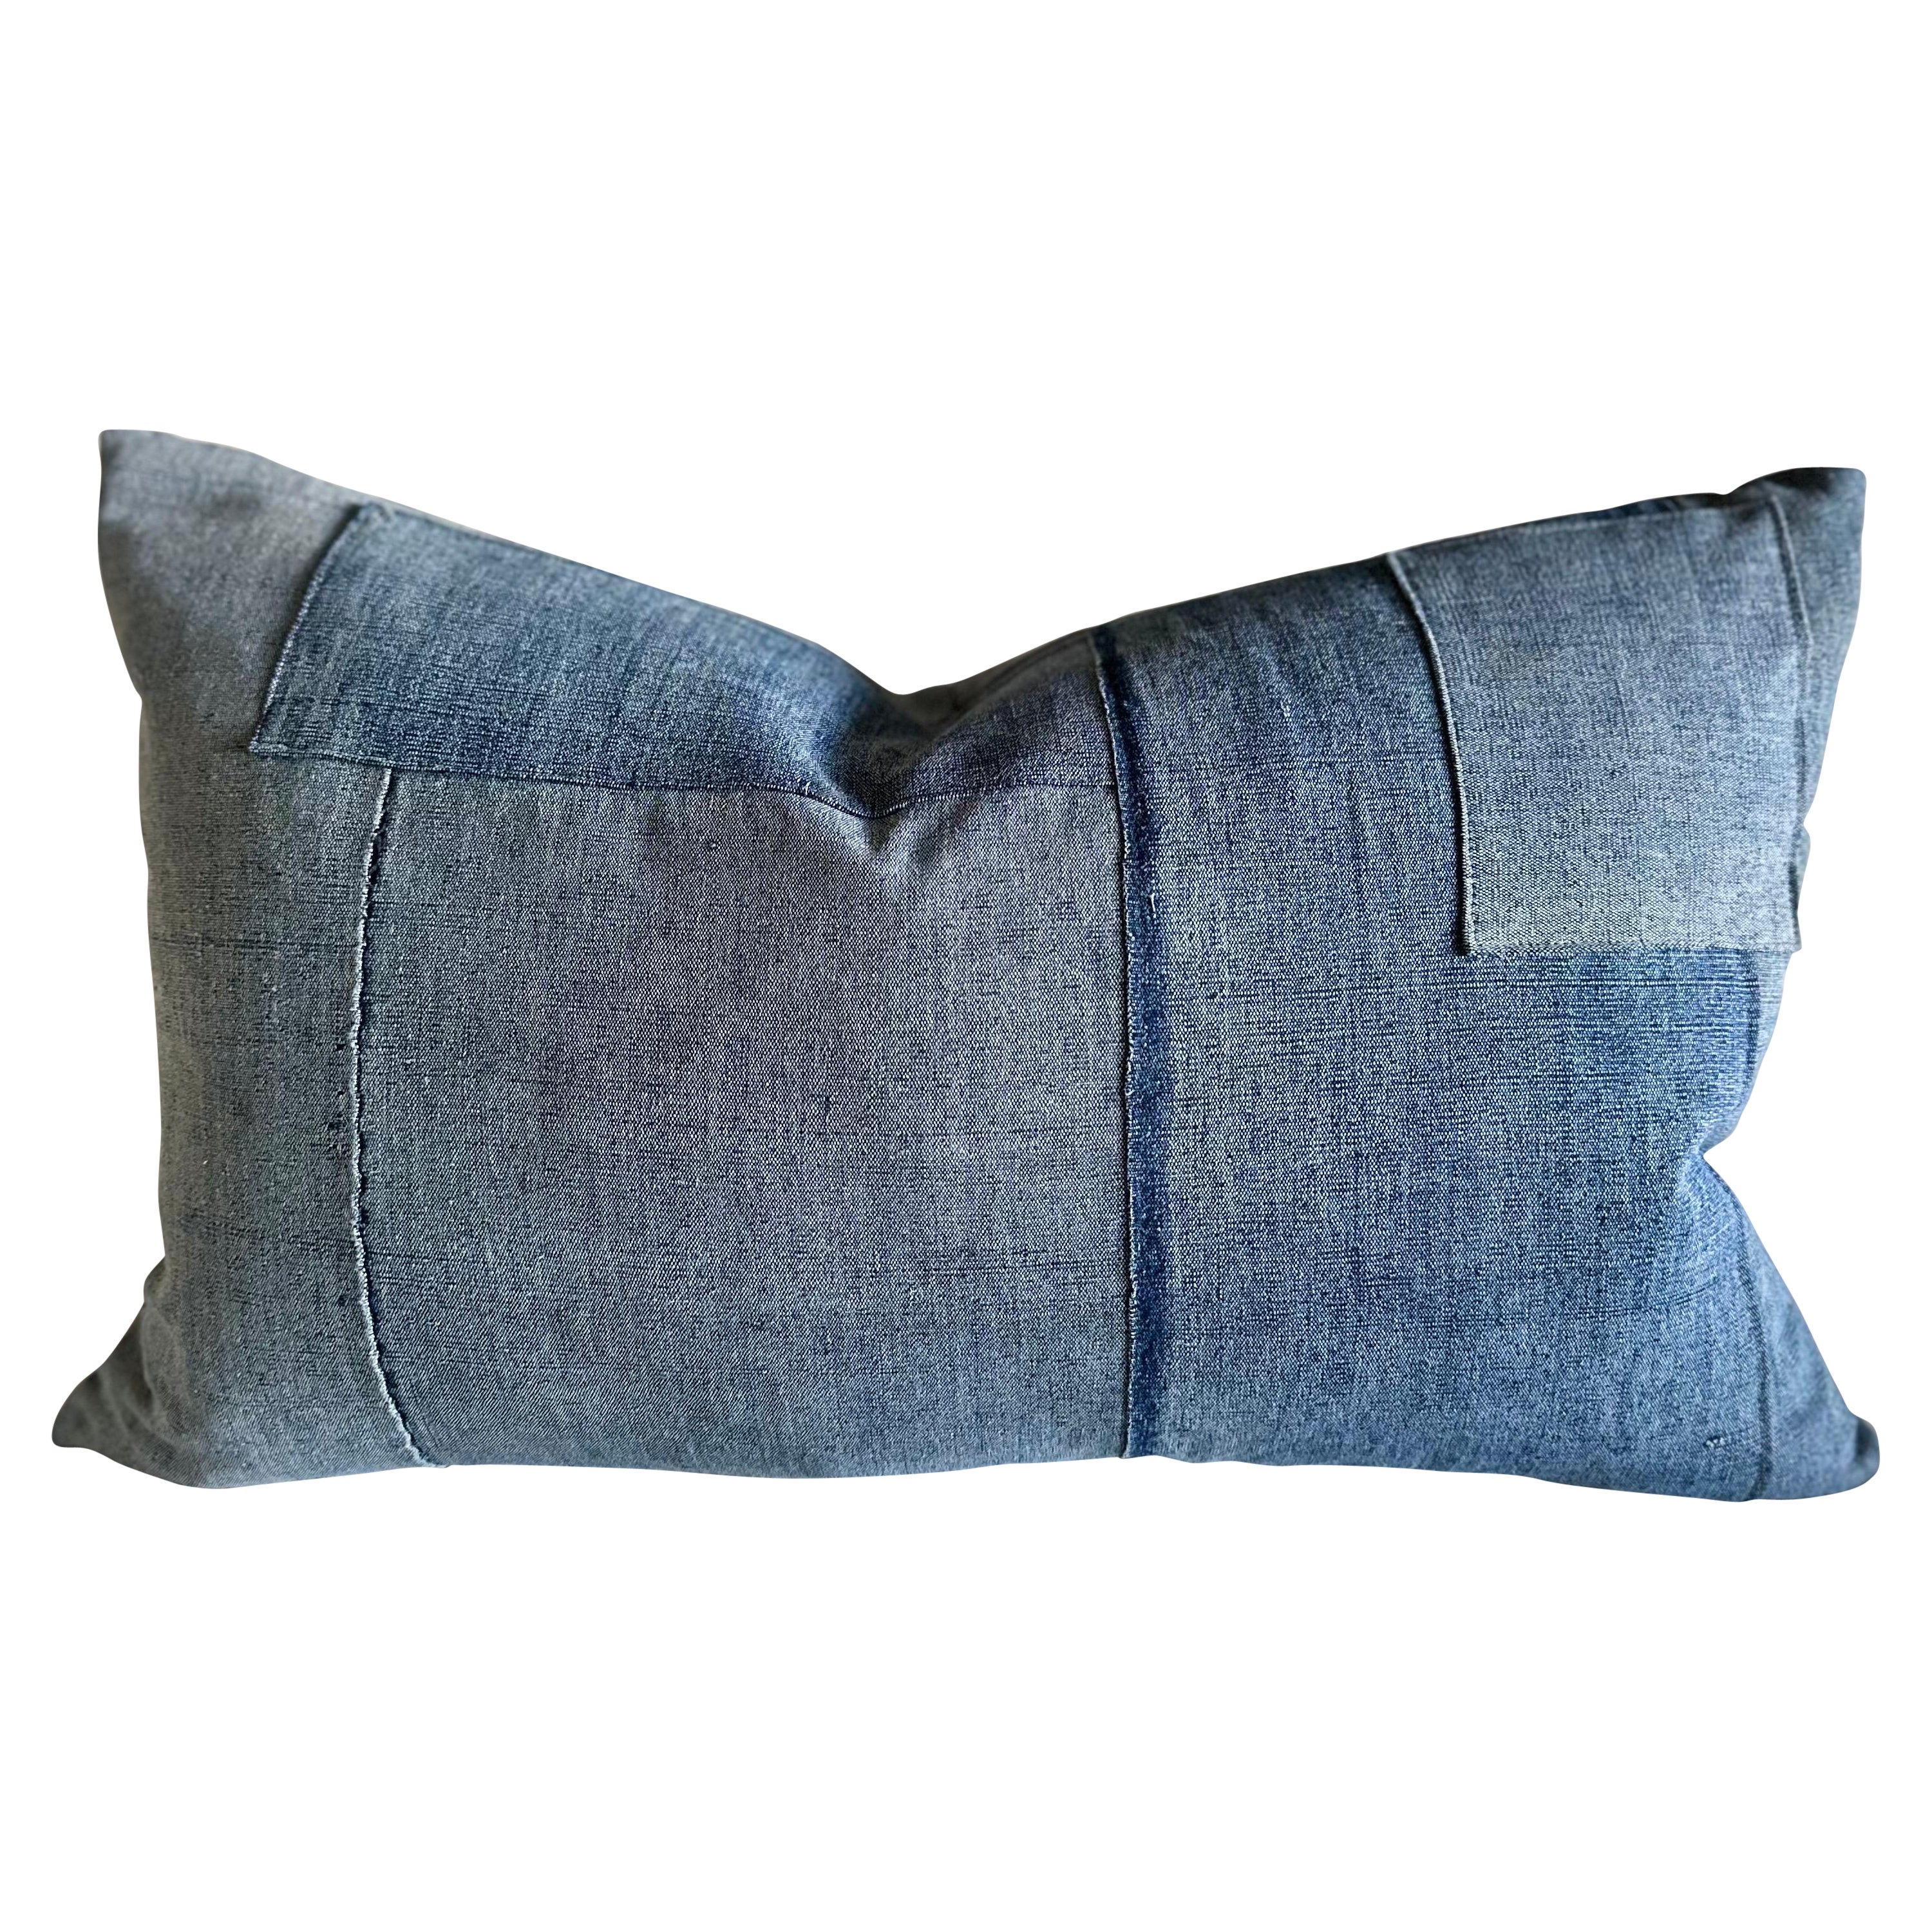 Lumbar Pillow Made from Vintage Japanese Boro Fabric